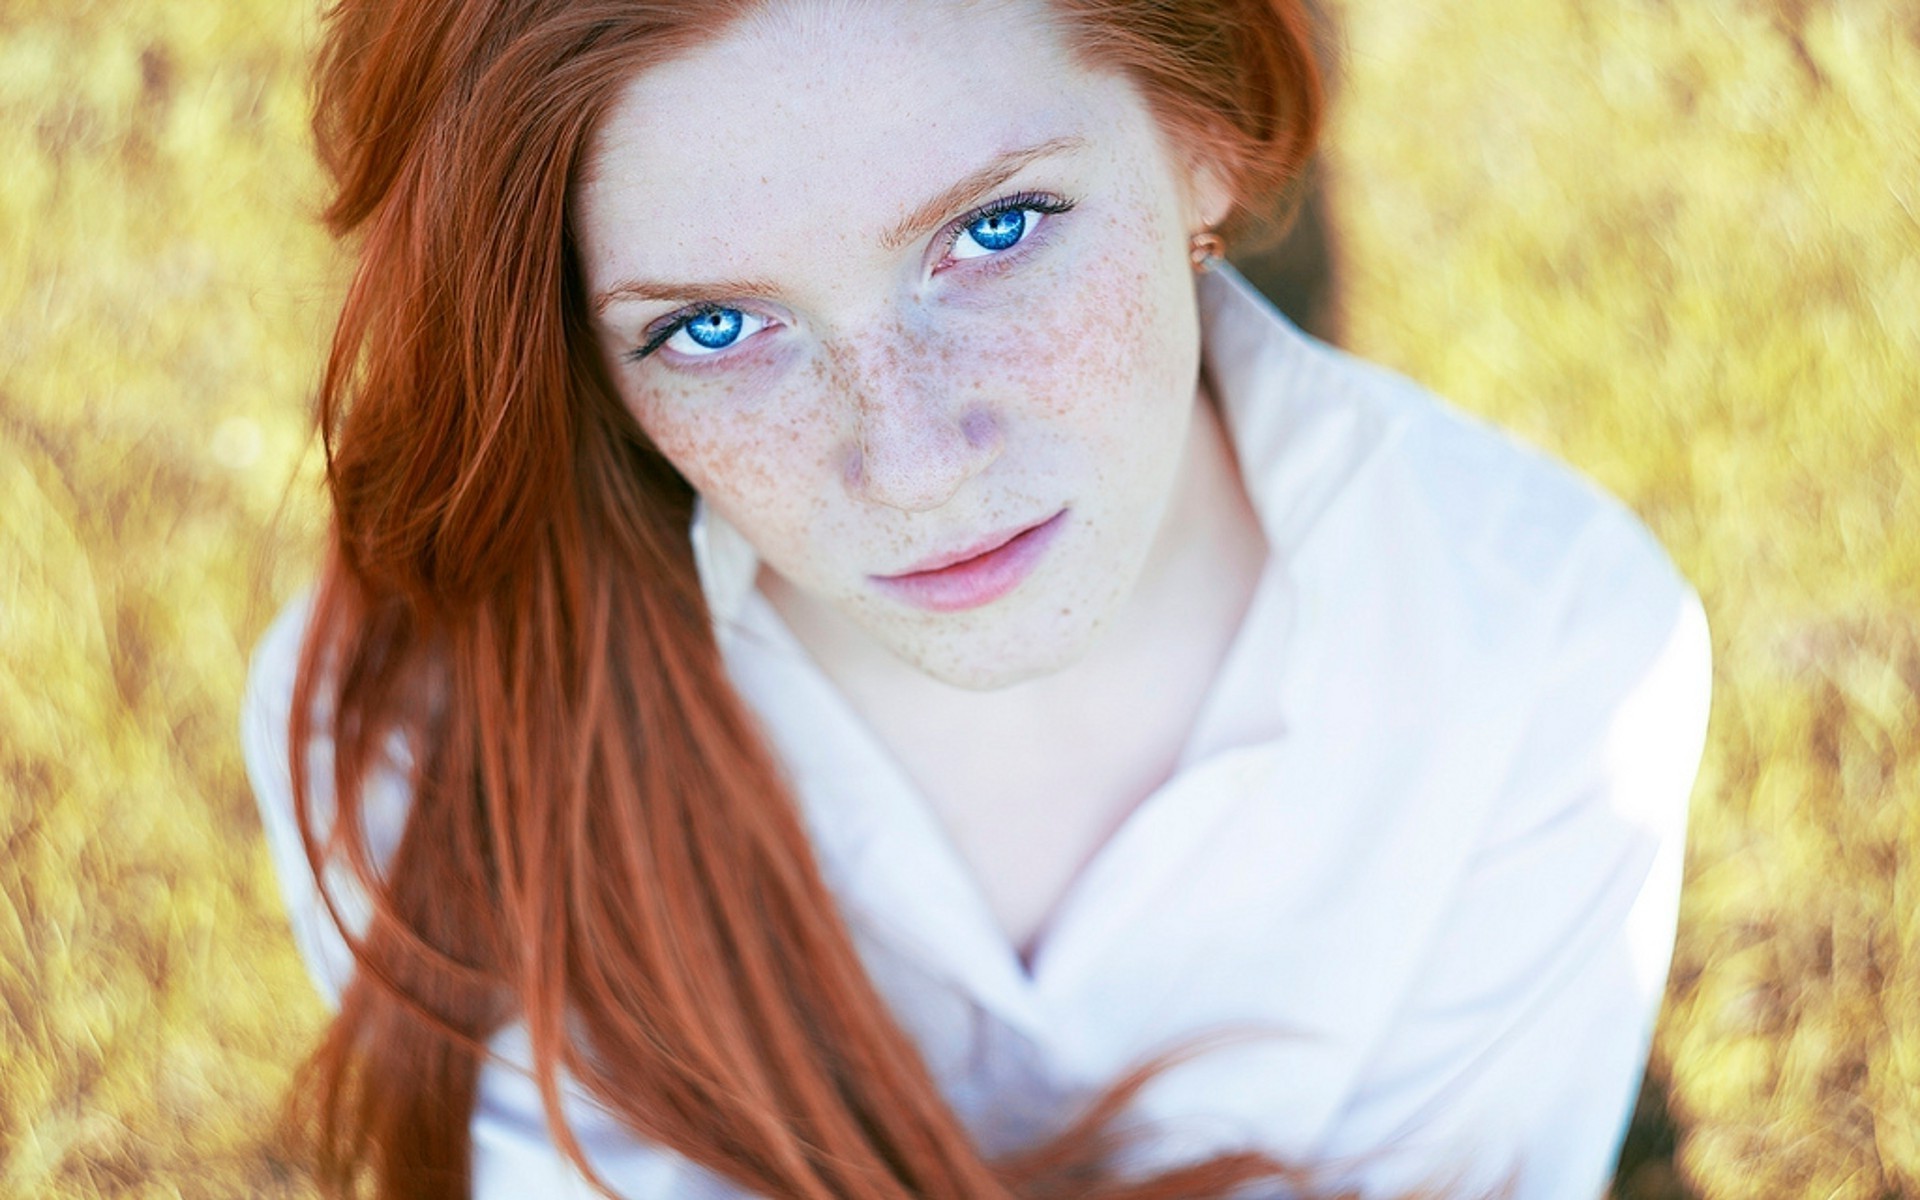 Women Redhead Freckles Blue Eyes Looking At View